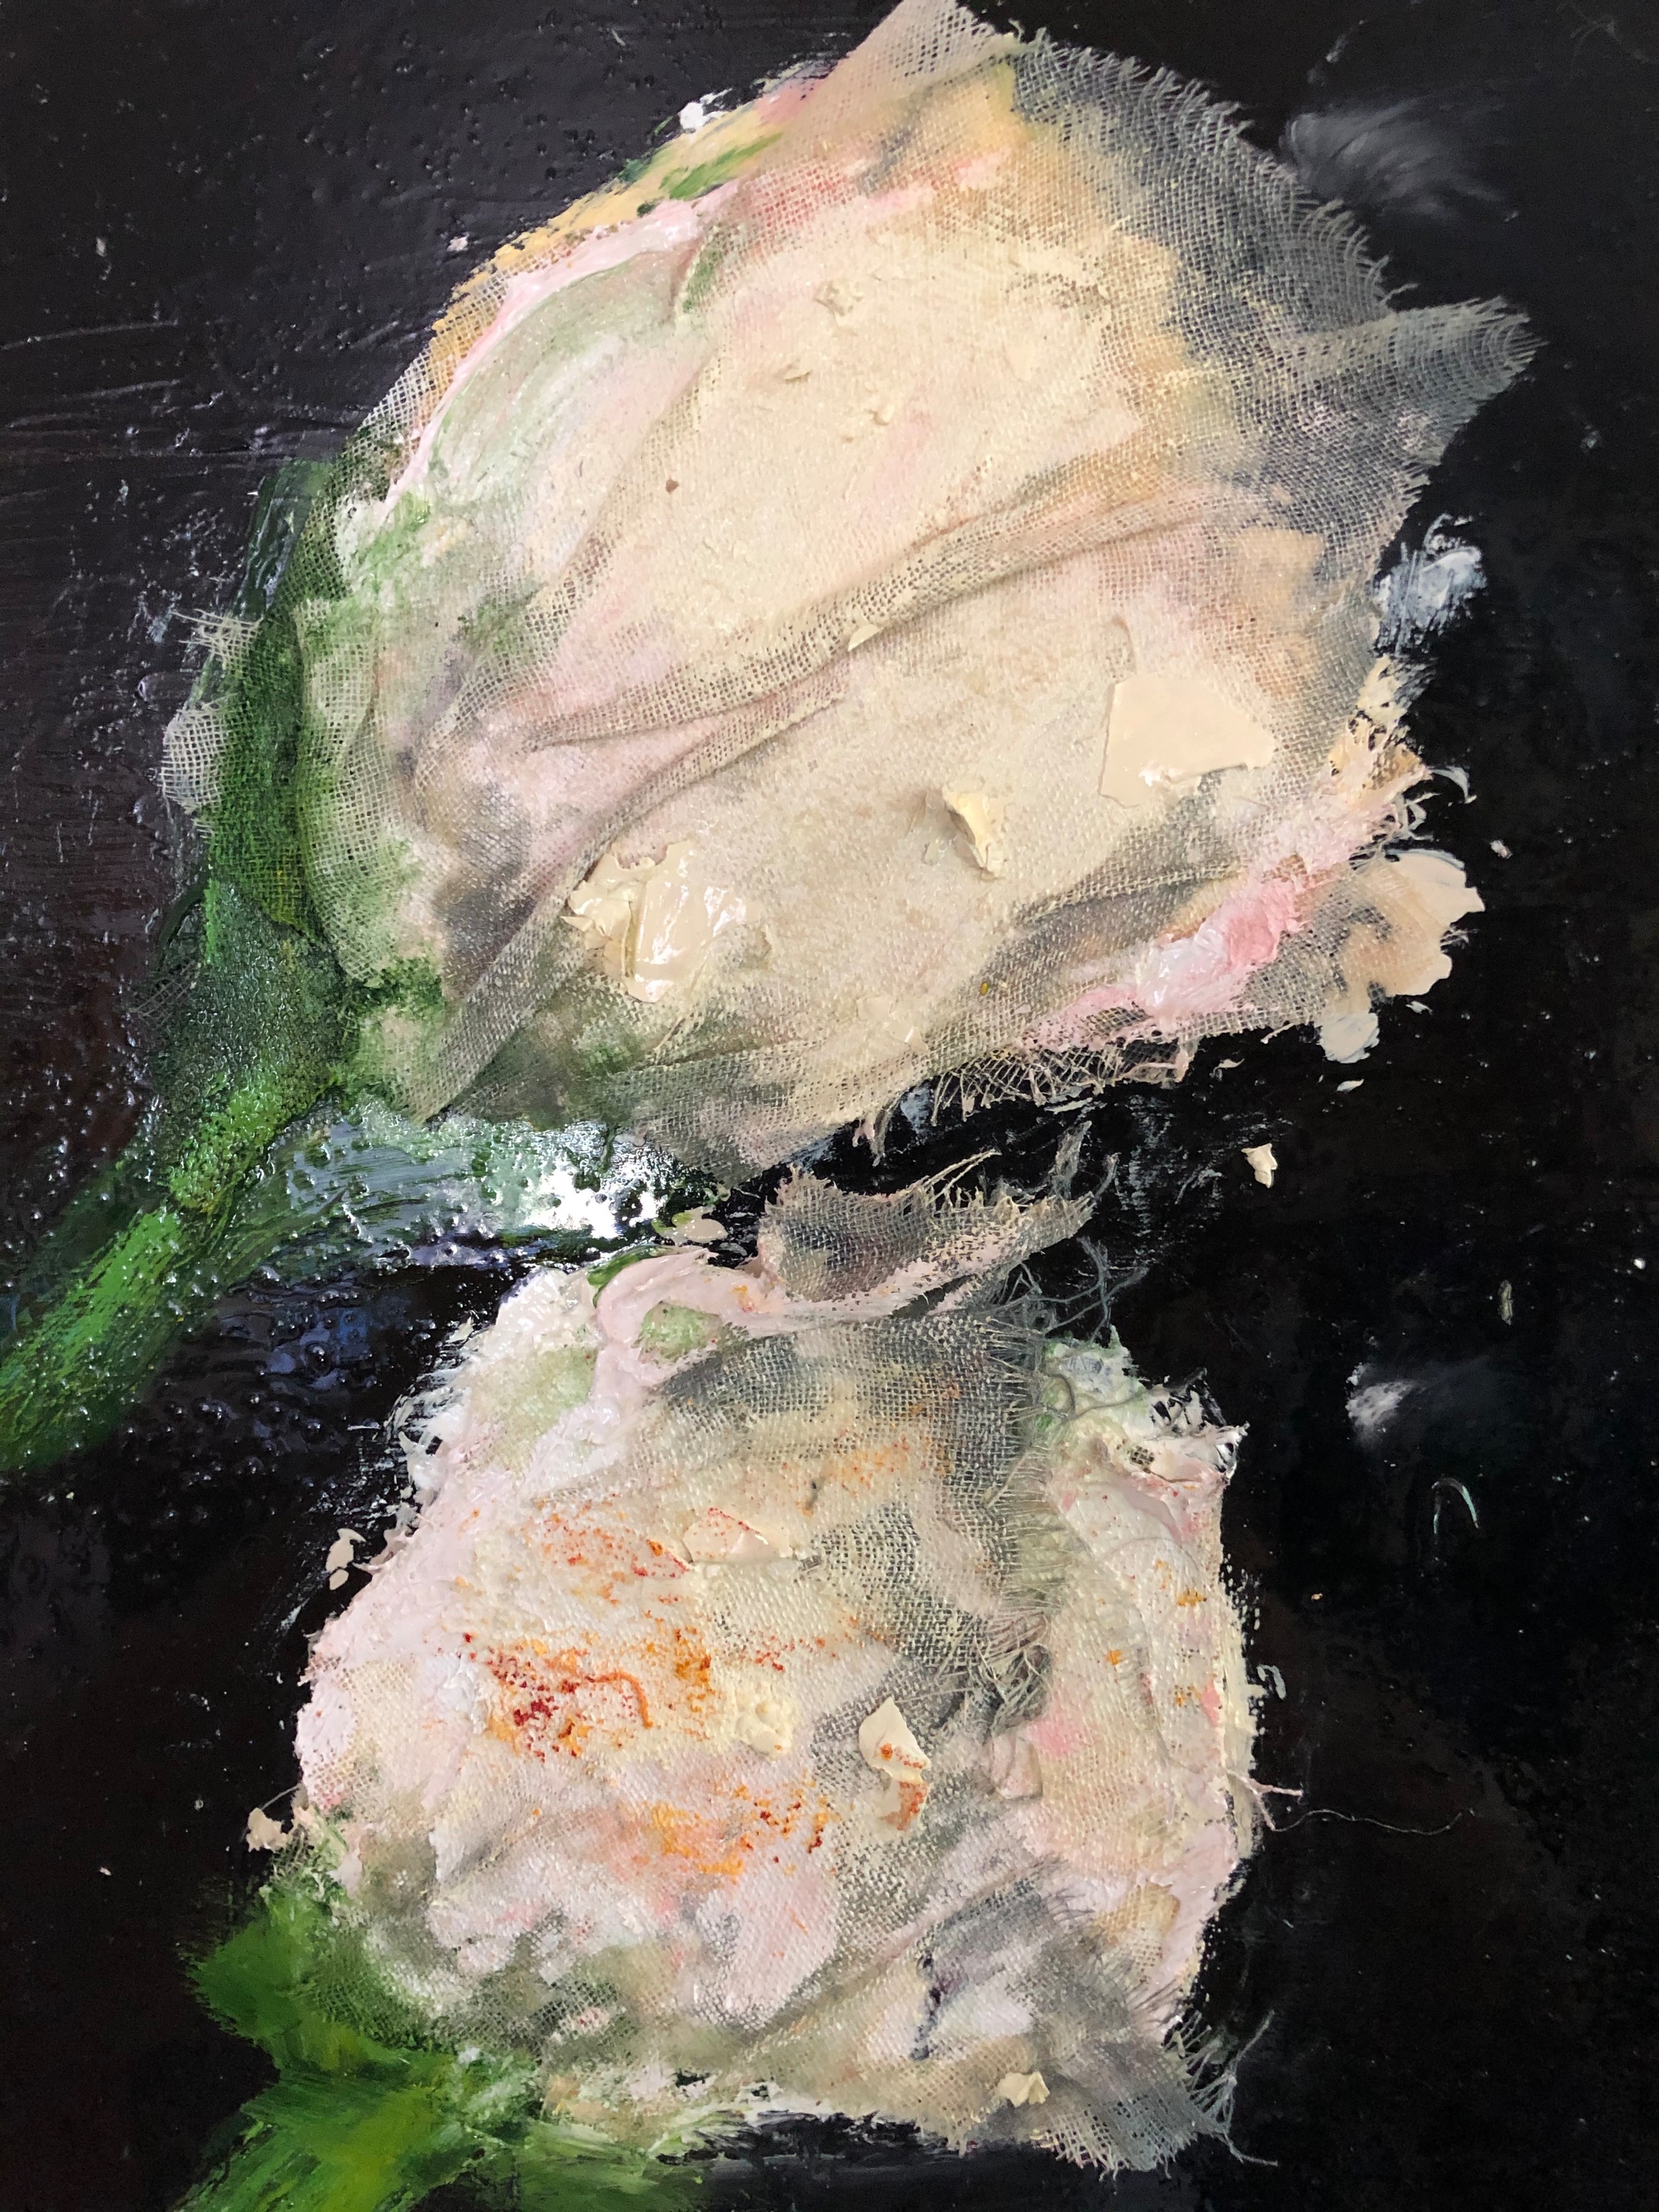 White roses oil and guasze on wood 12x9 aj5m6s